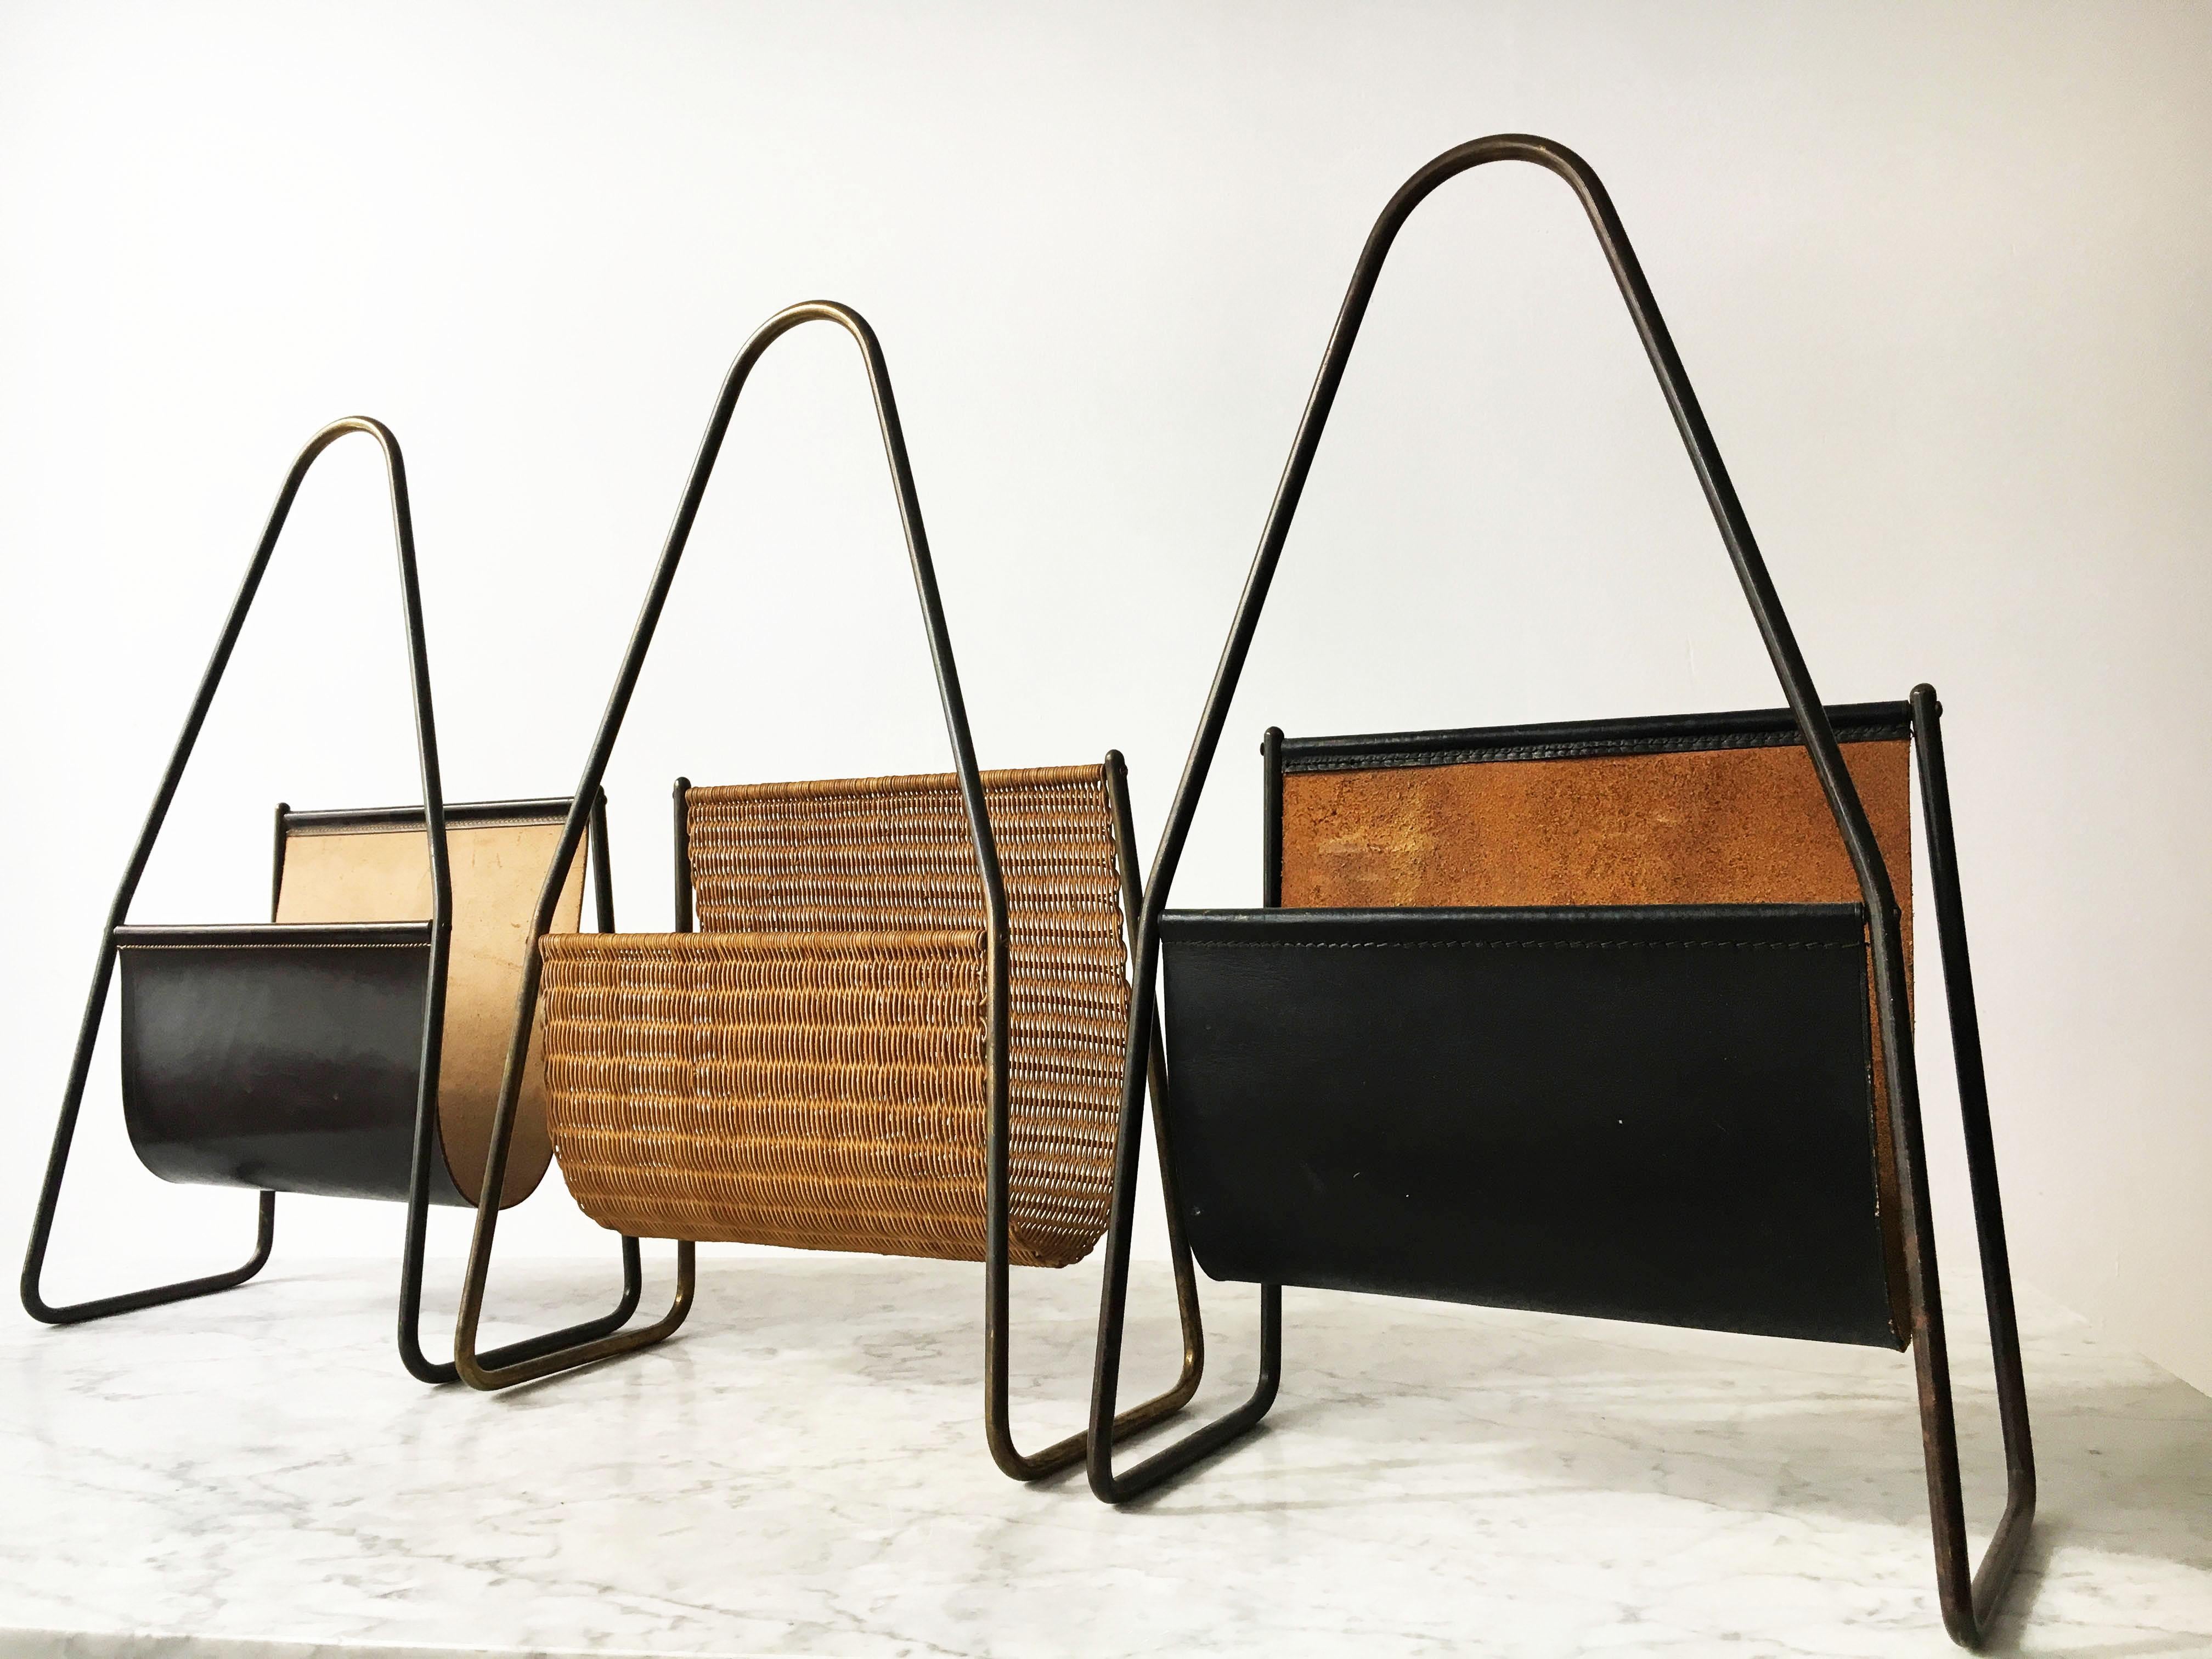 Austrian Carl Auböck II Vintage Magazine Stand Collection Group of Three, Austria, 1950s For Sale